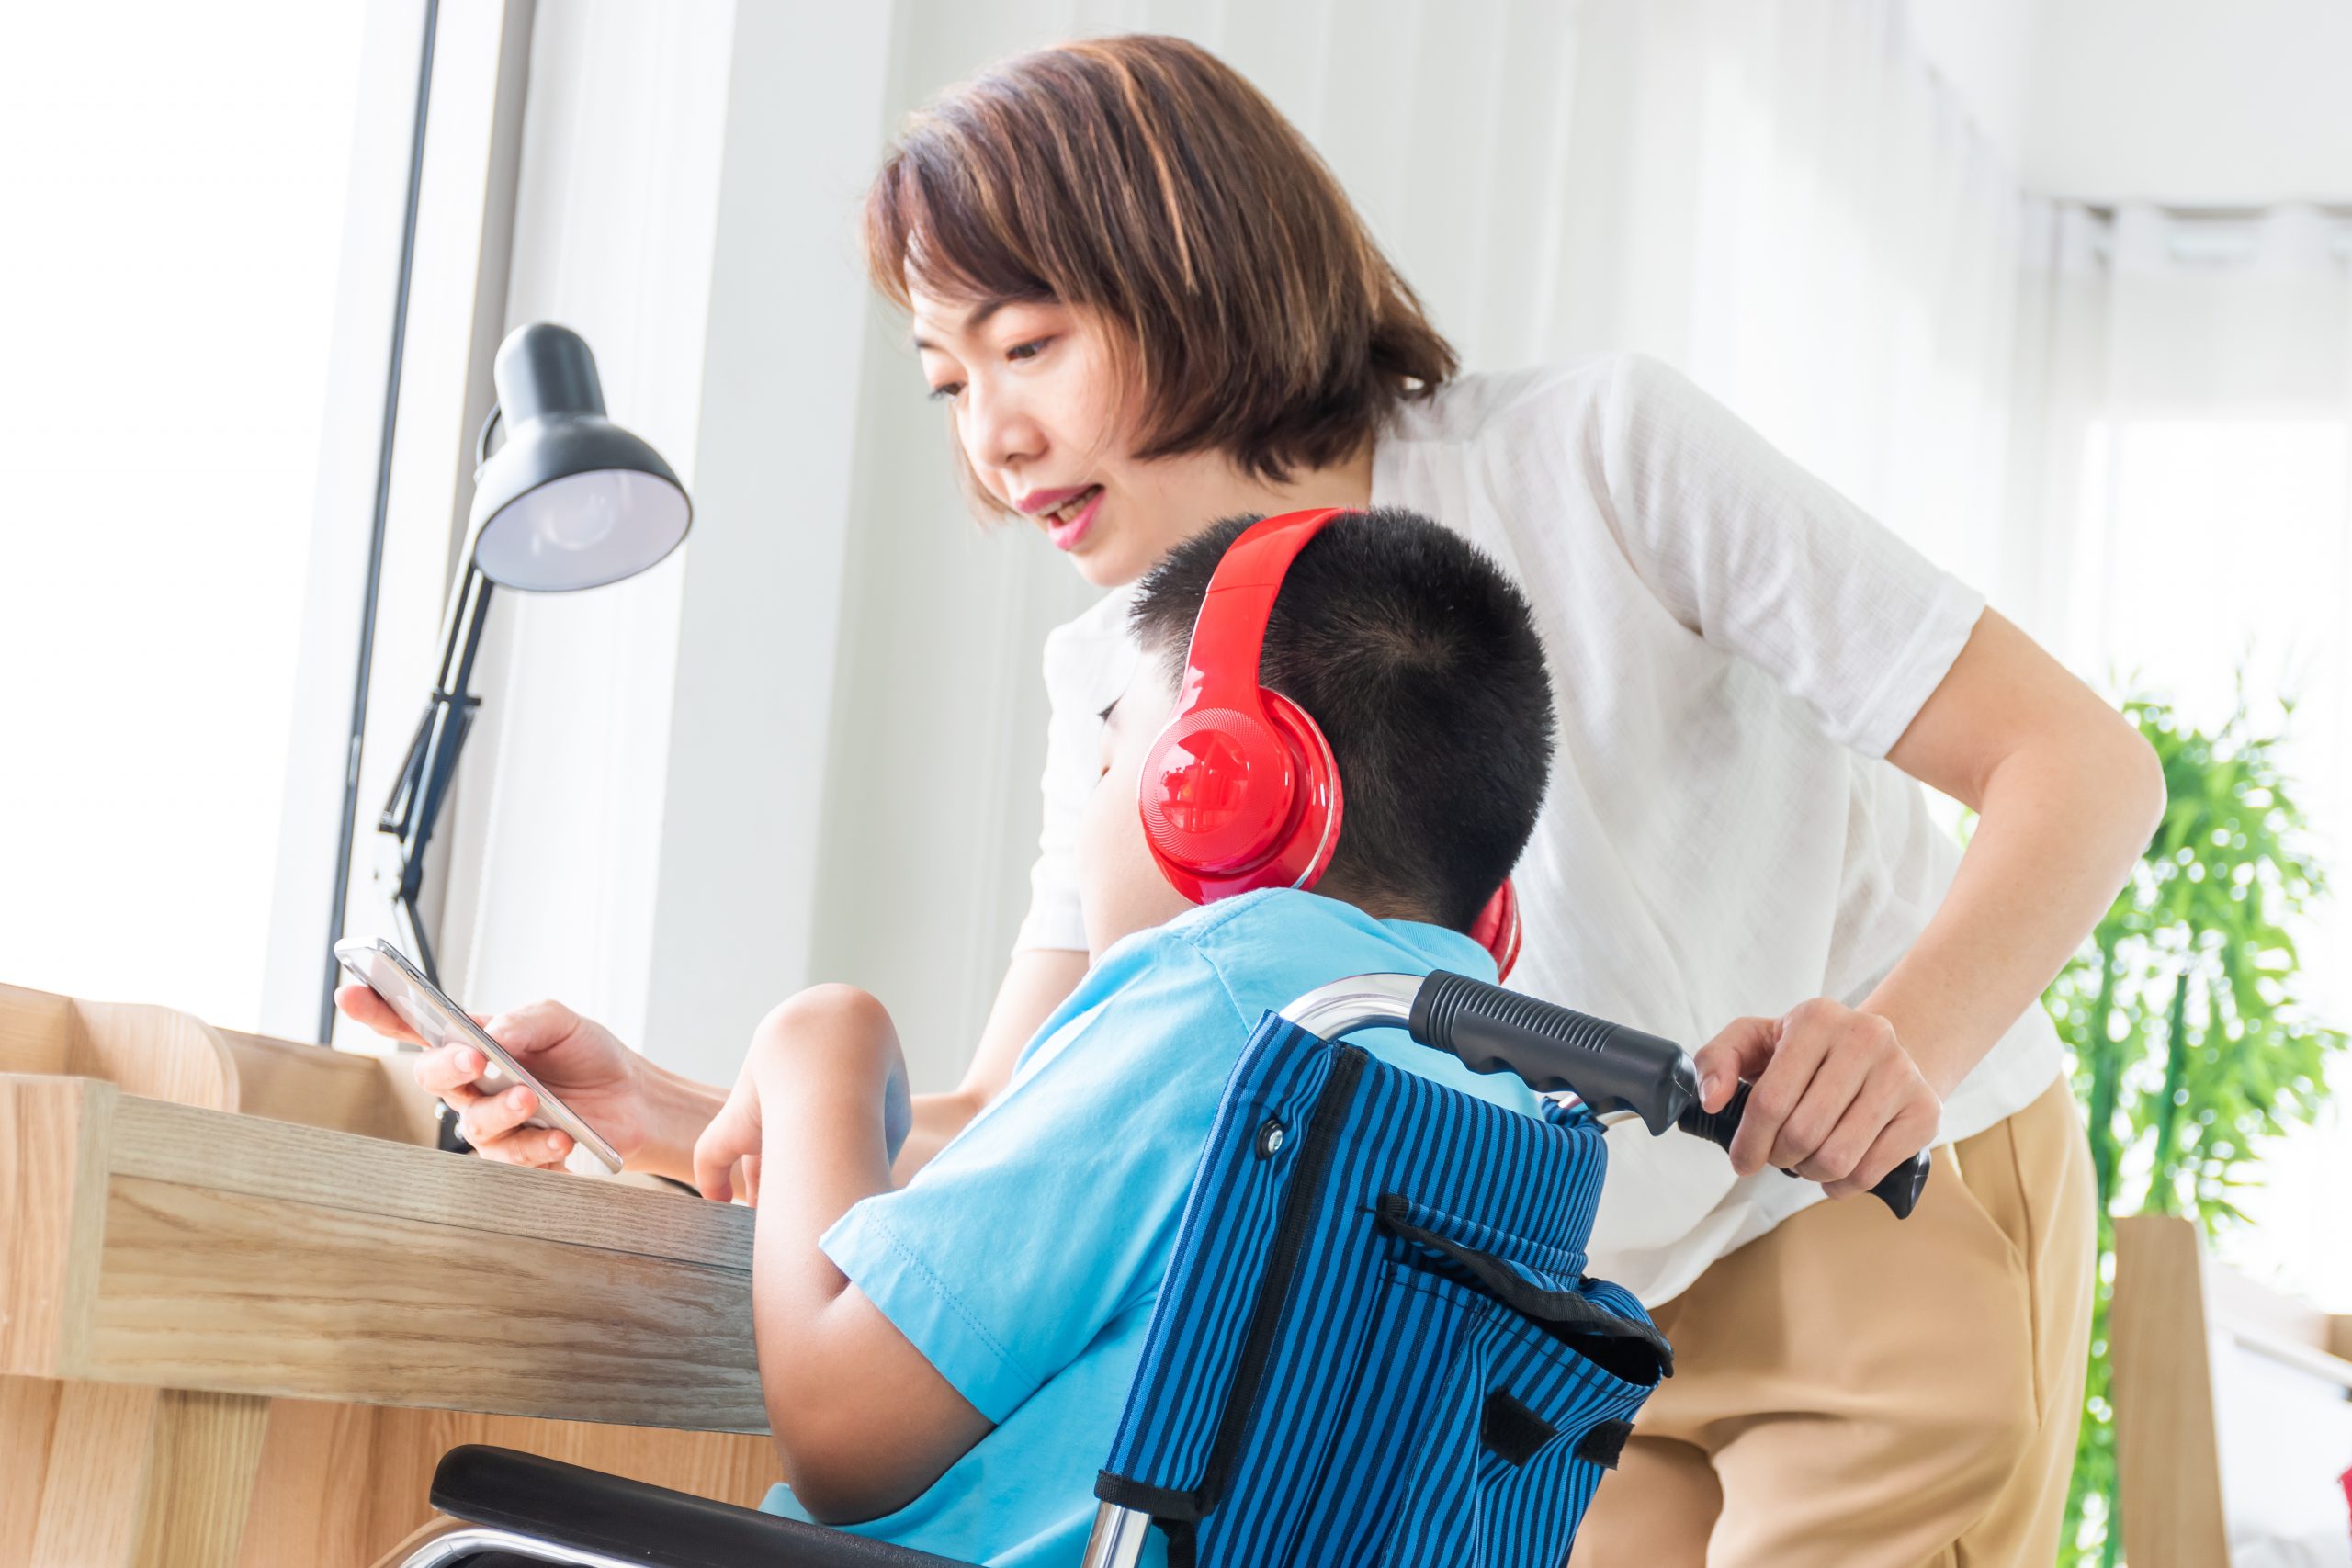 Support worker assisting child on wheelchair using smartphone